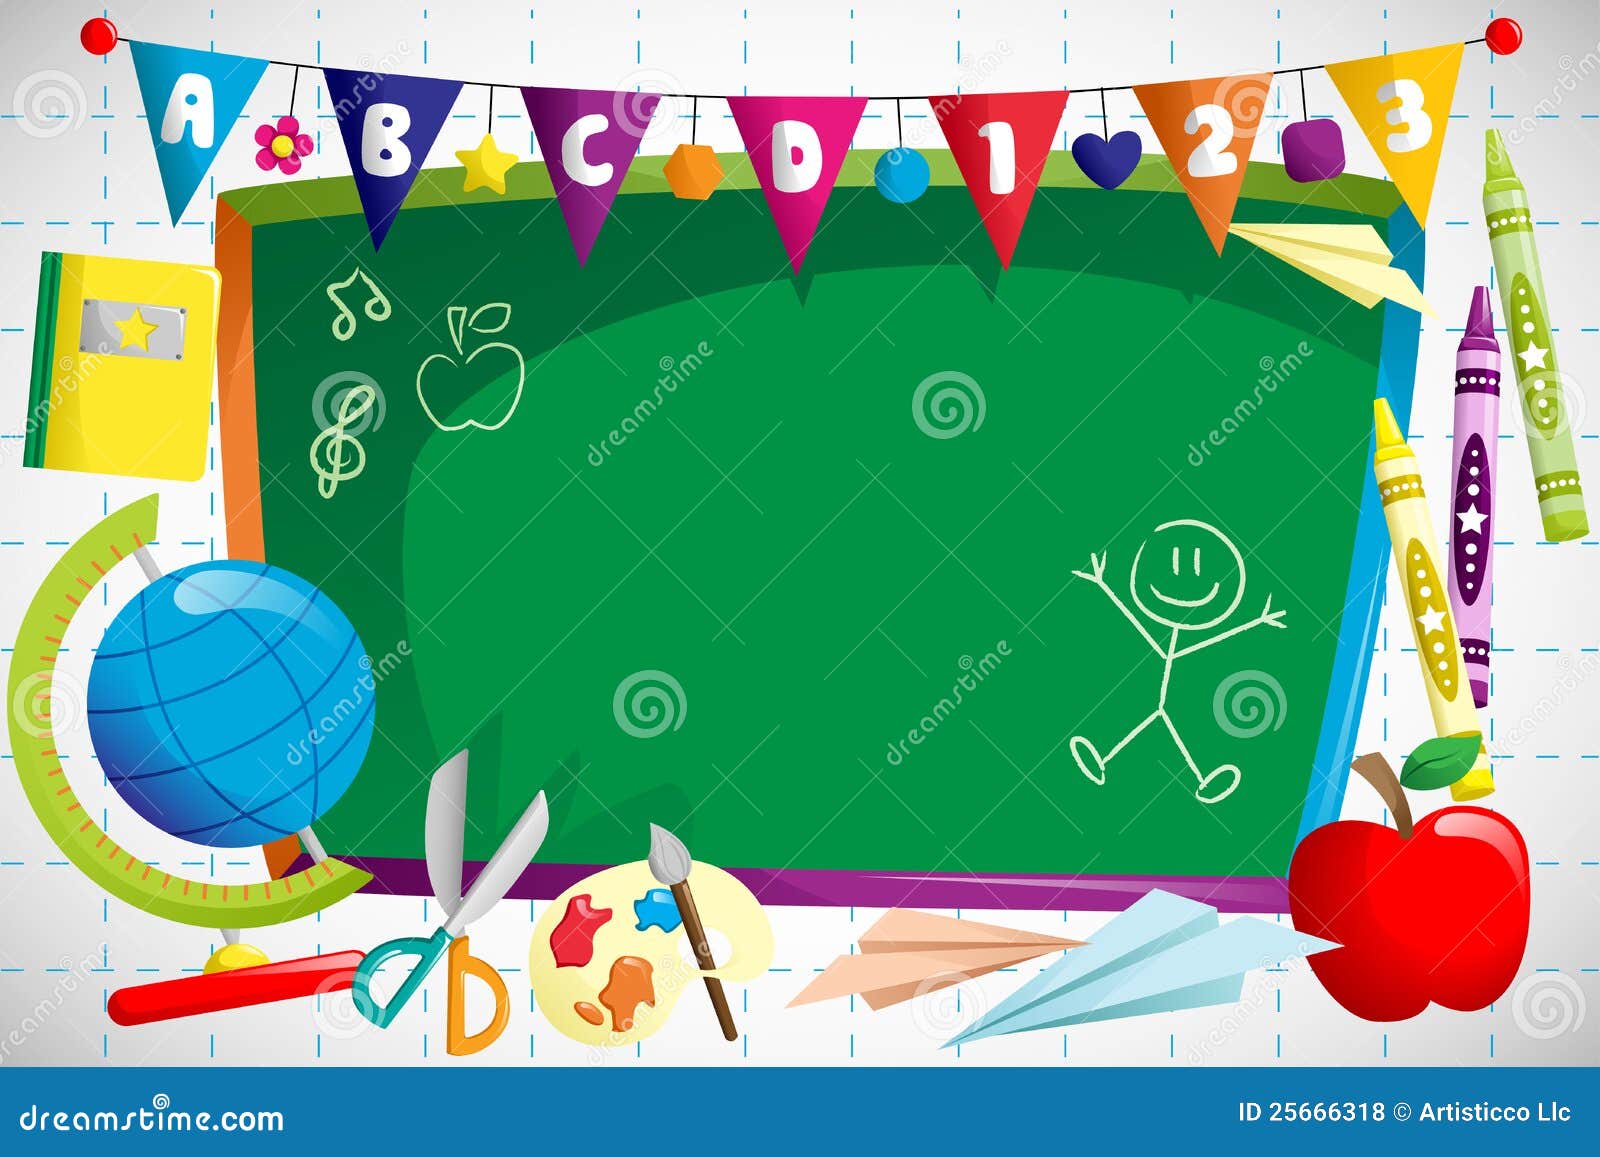 School Background Photos Download Free School Background Stock Photos  HD  Images